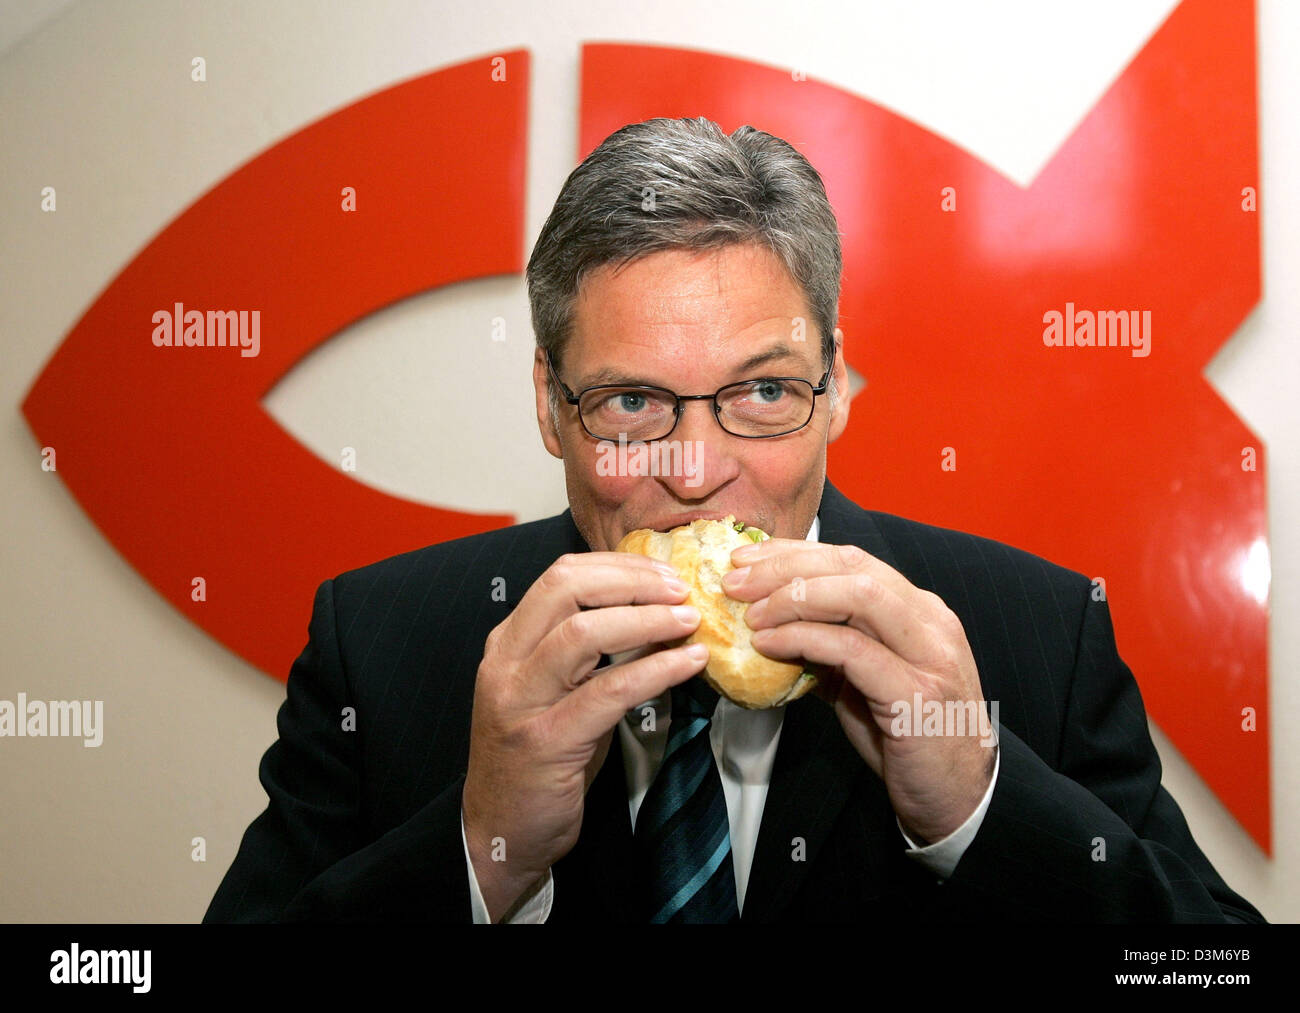 (dpa) - Heiner Kamps bites with joy into a fish bread roll while introducing himself as Nordsee's new shareholder and new CEO in front of a Nordsee logo at the company's headquarters in Bremerhaven, Germany, Thursday 08 December 2005. Prior to his introduction the company announced its future plans and development agenda. Photo: Ingo Wagner Stock Photo